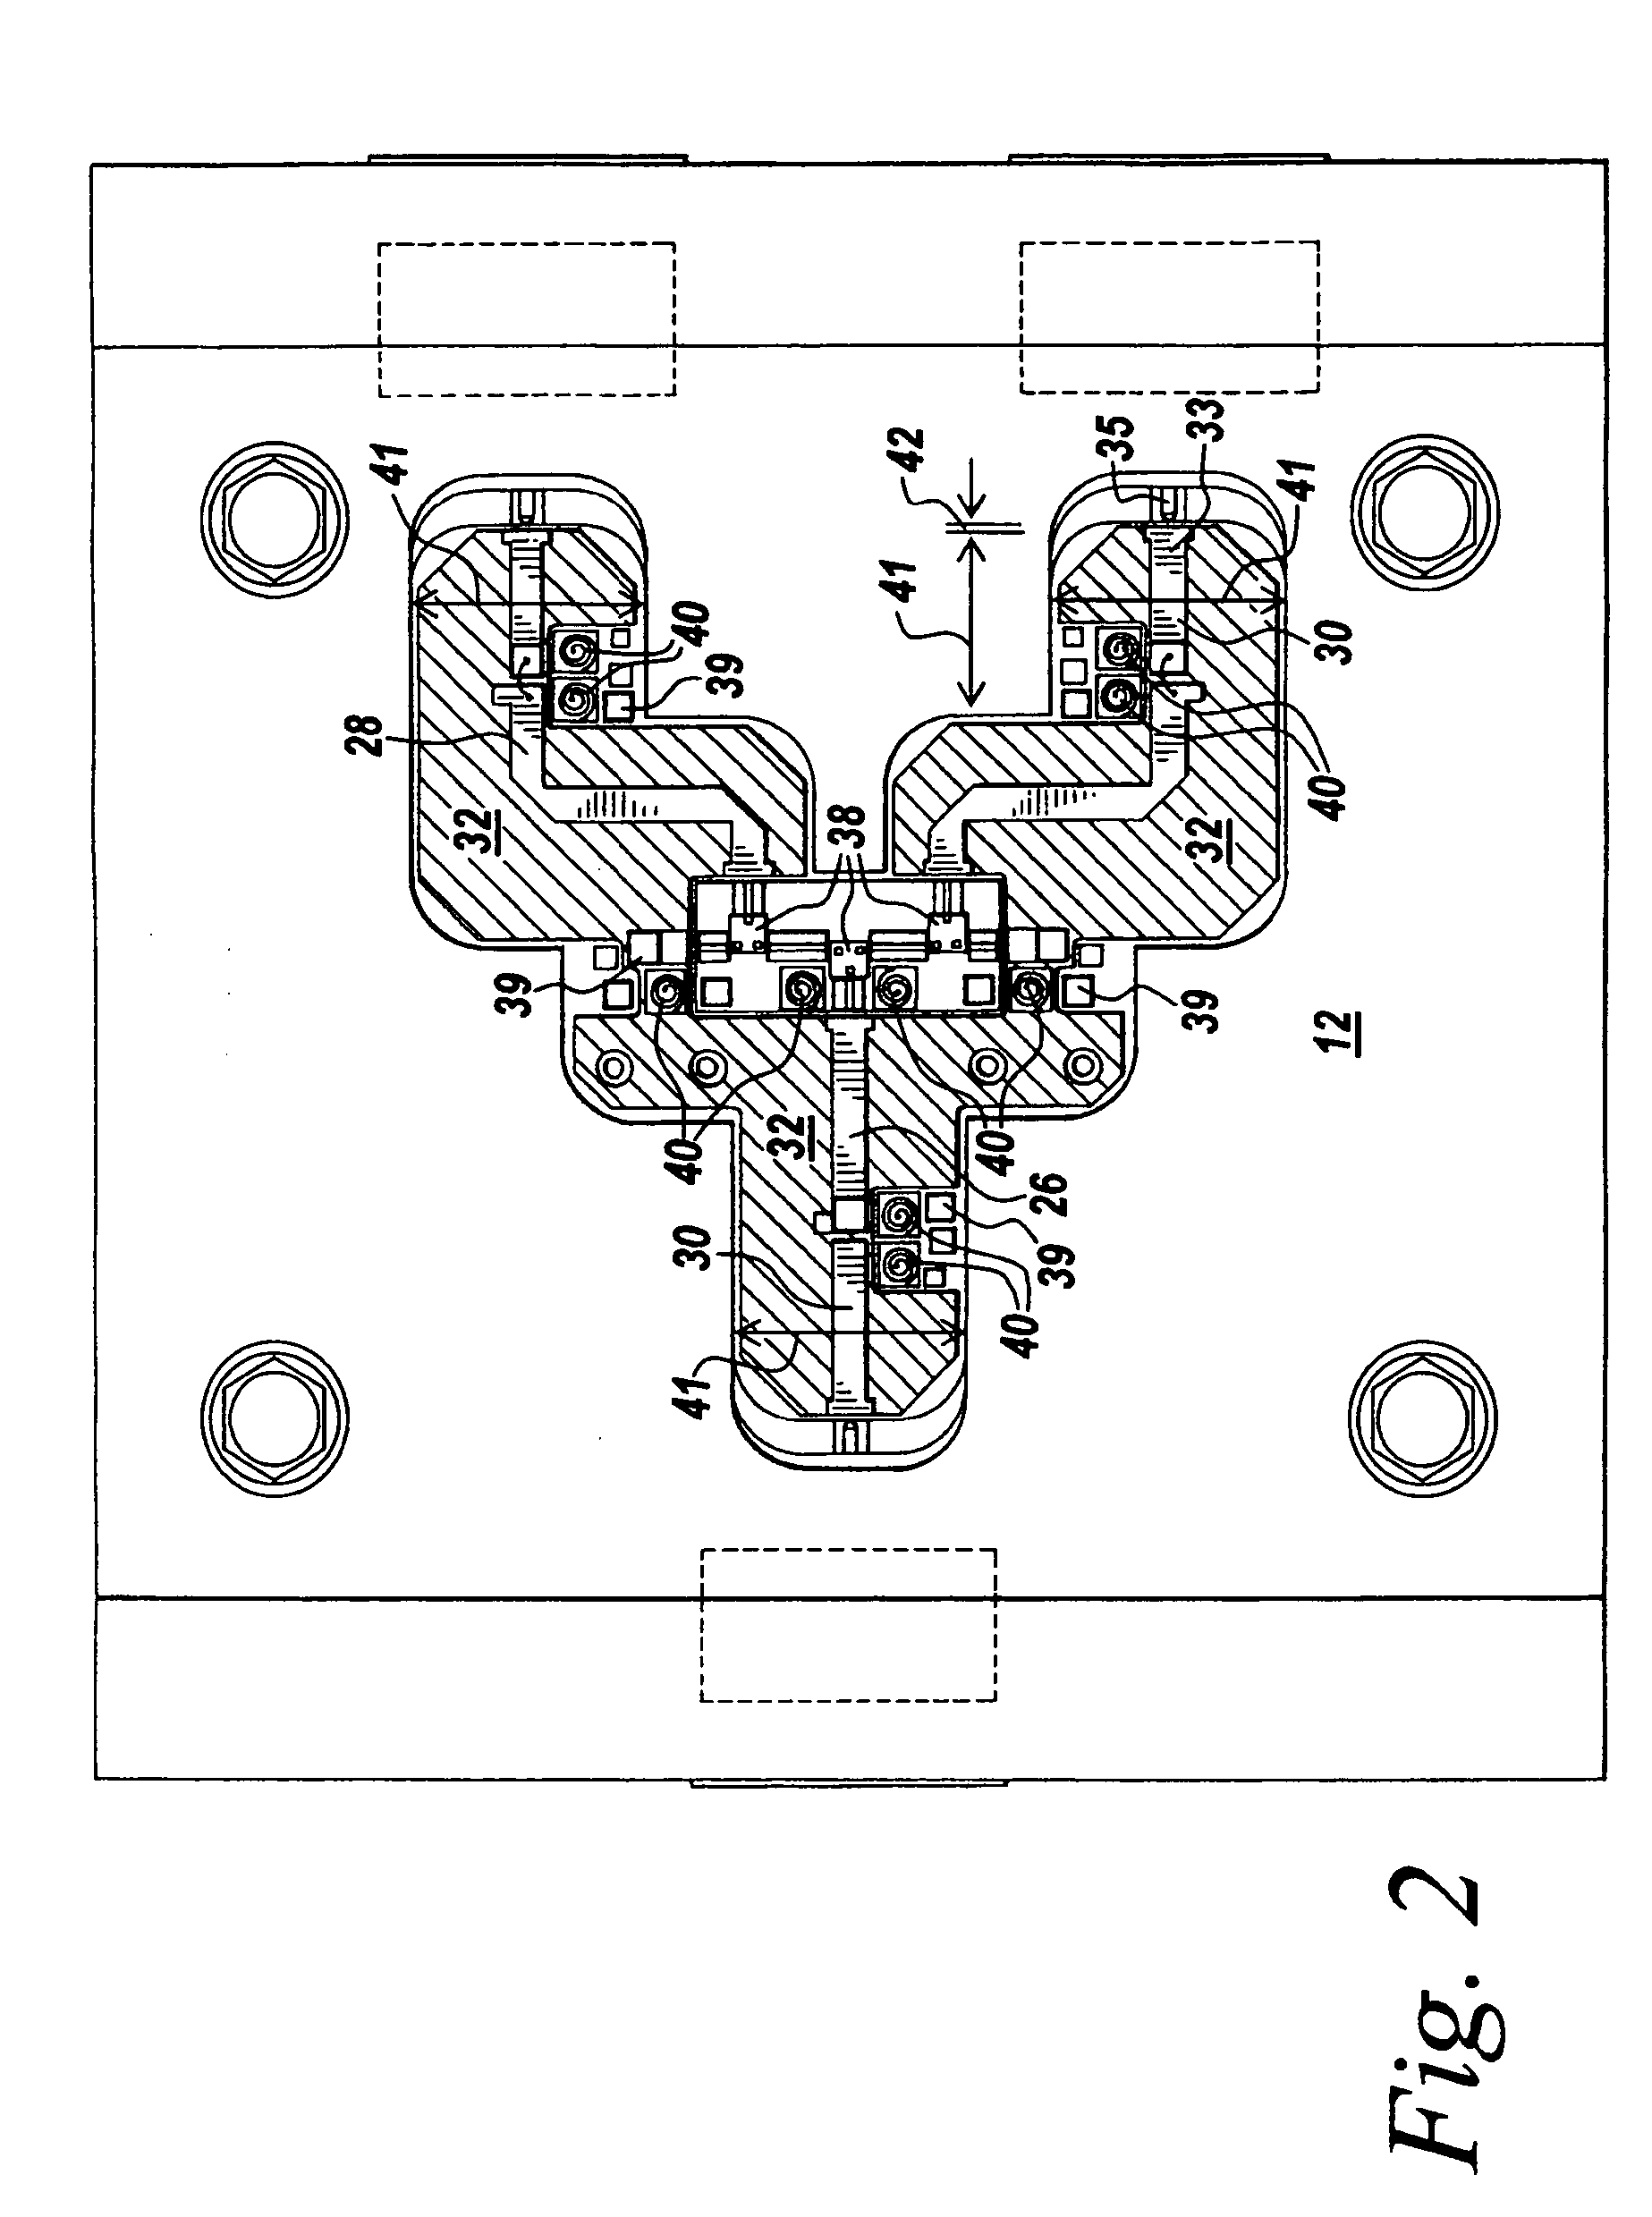 Method and apparatus for rapid prototyping of monolithic microwave integrated circuits